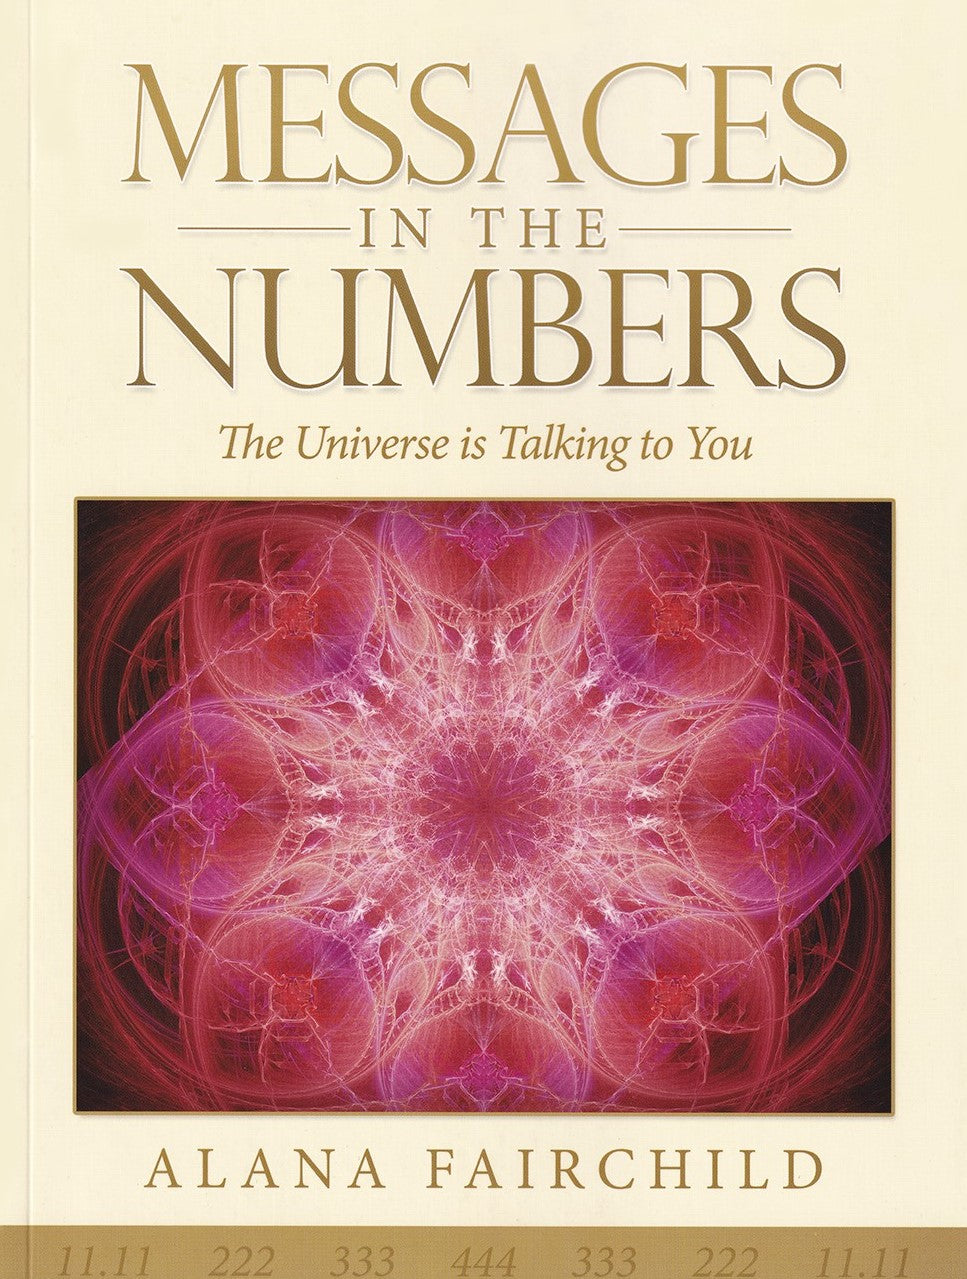 Messages in the Numbers - The Universe is Talking to You